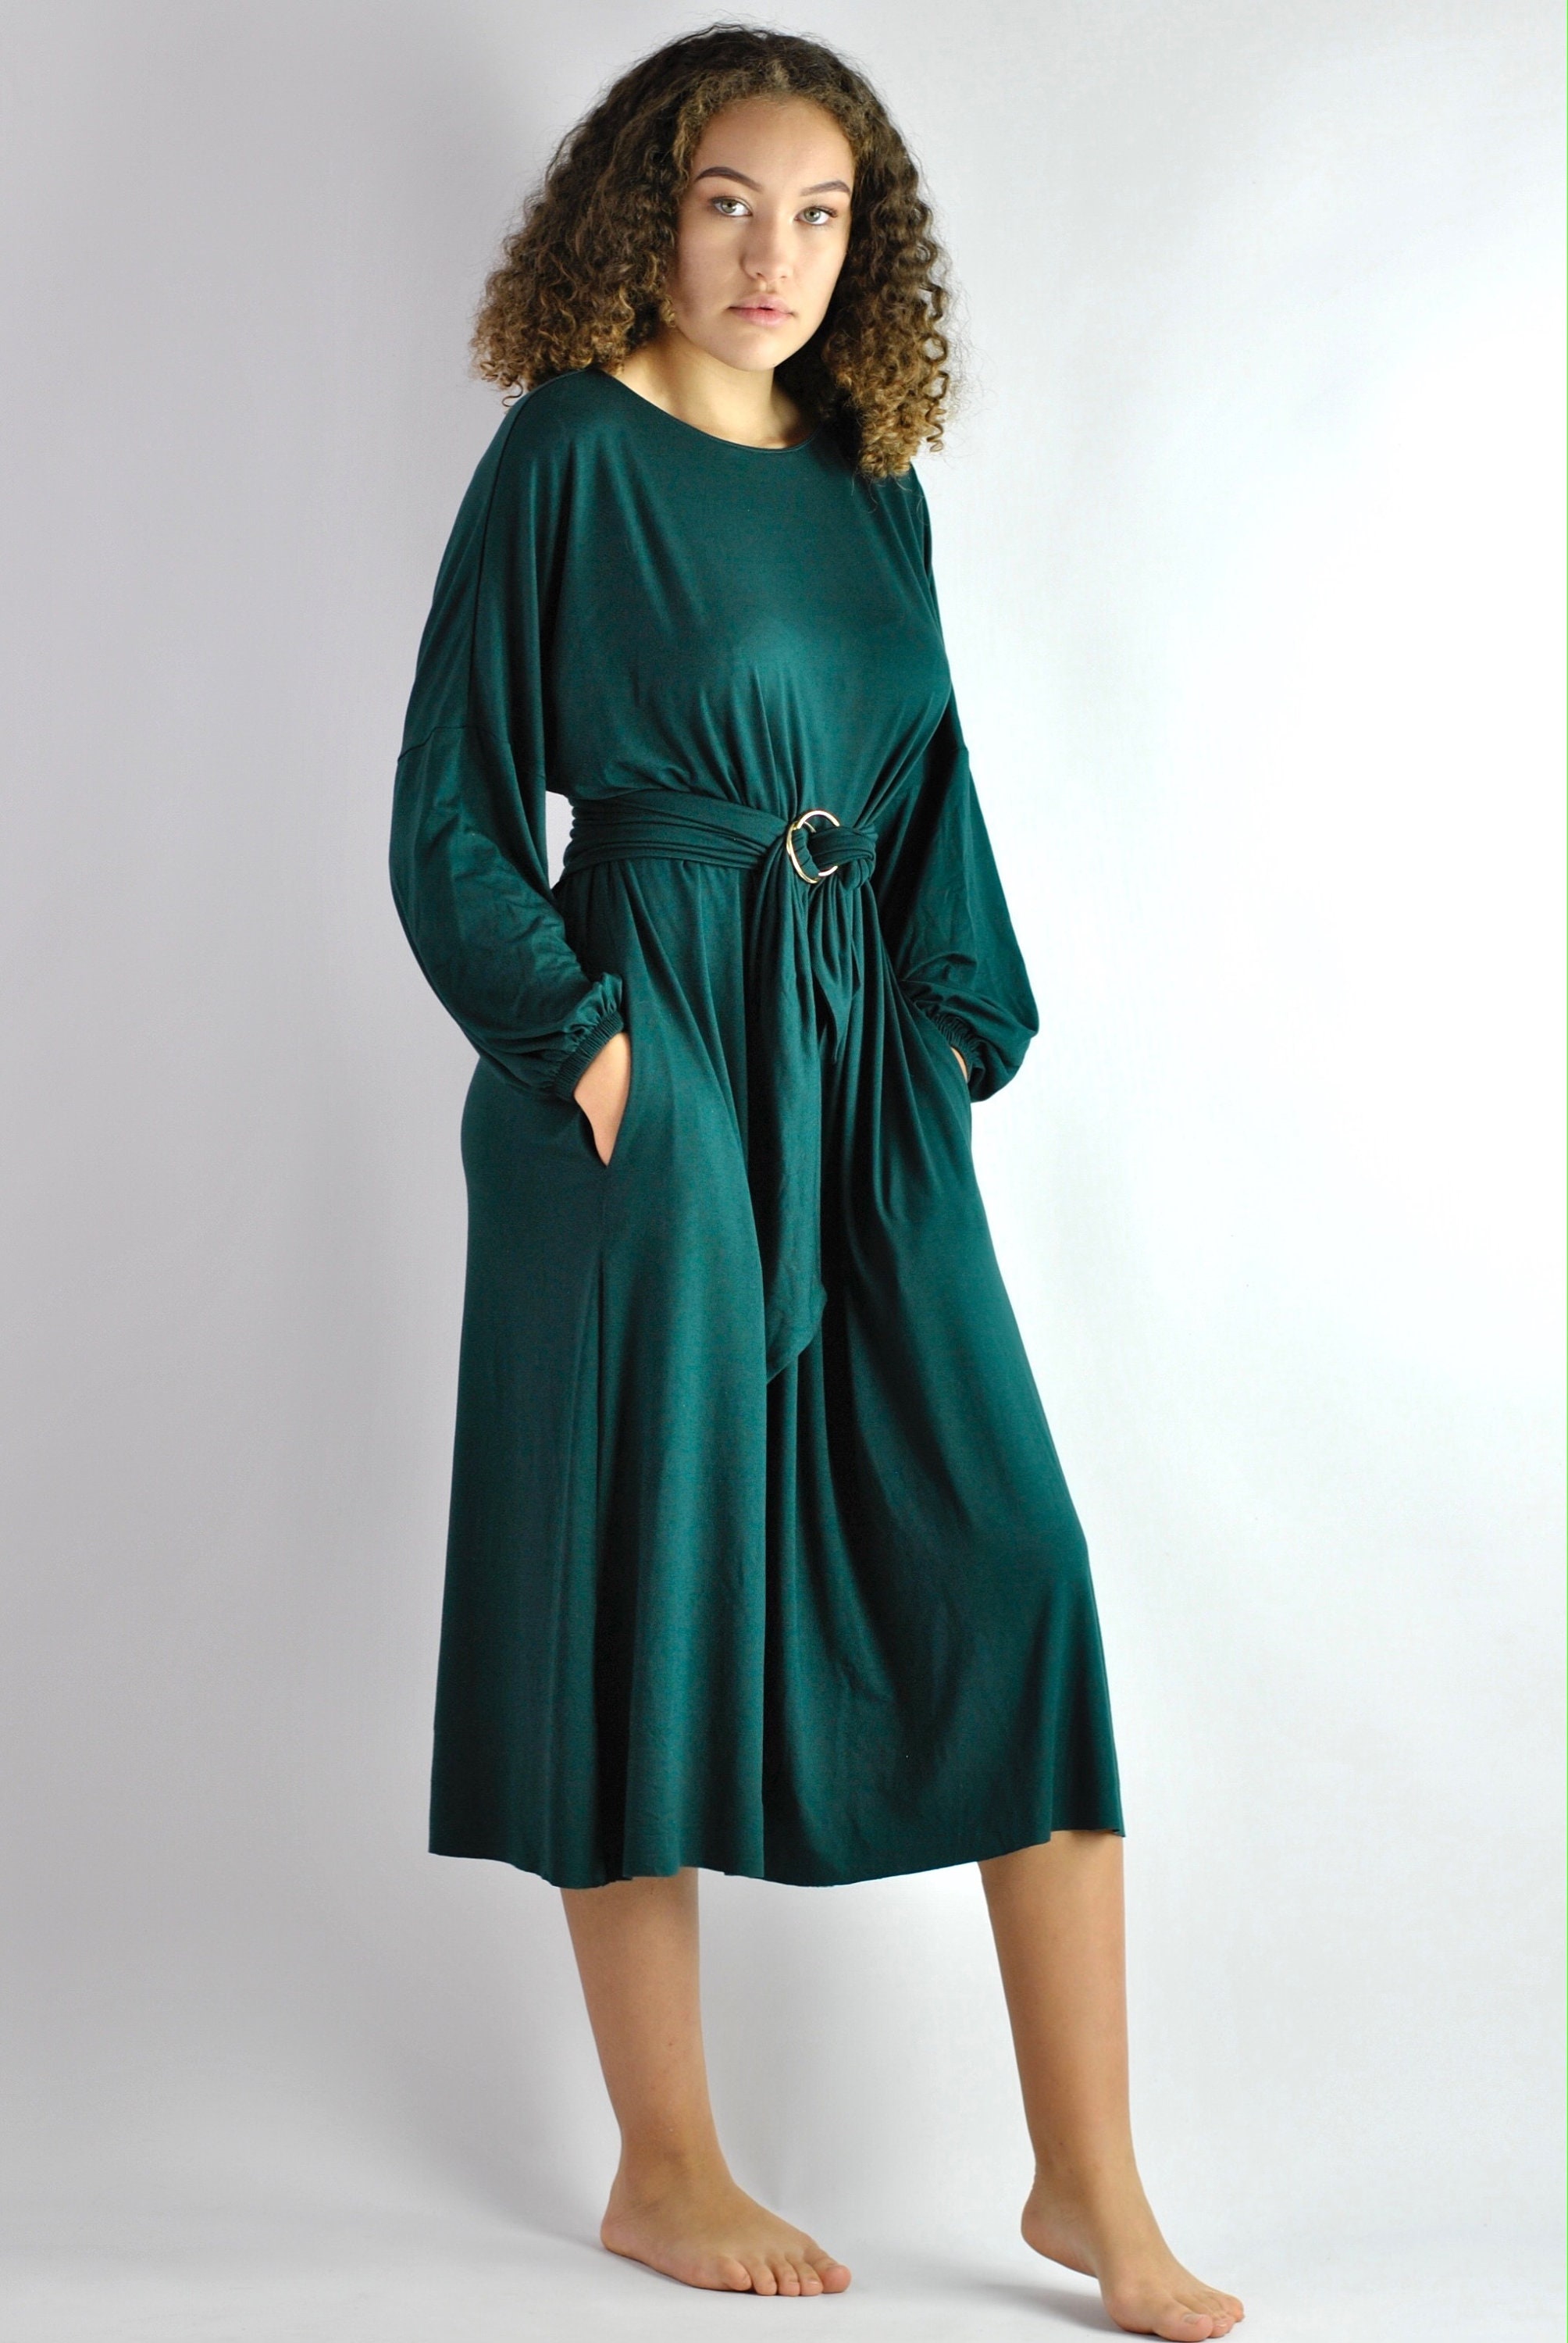 Bottle Green Dress Green Casual Dress Loose Fitting Tunic - Etsy